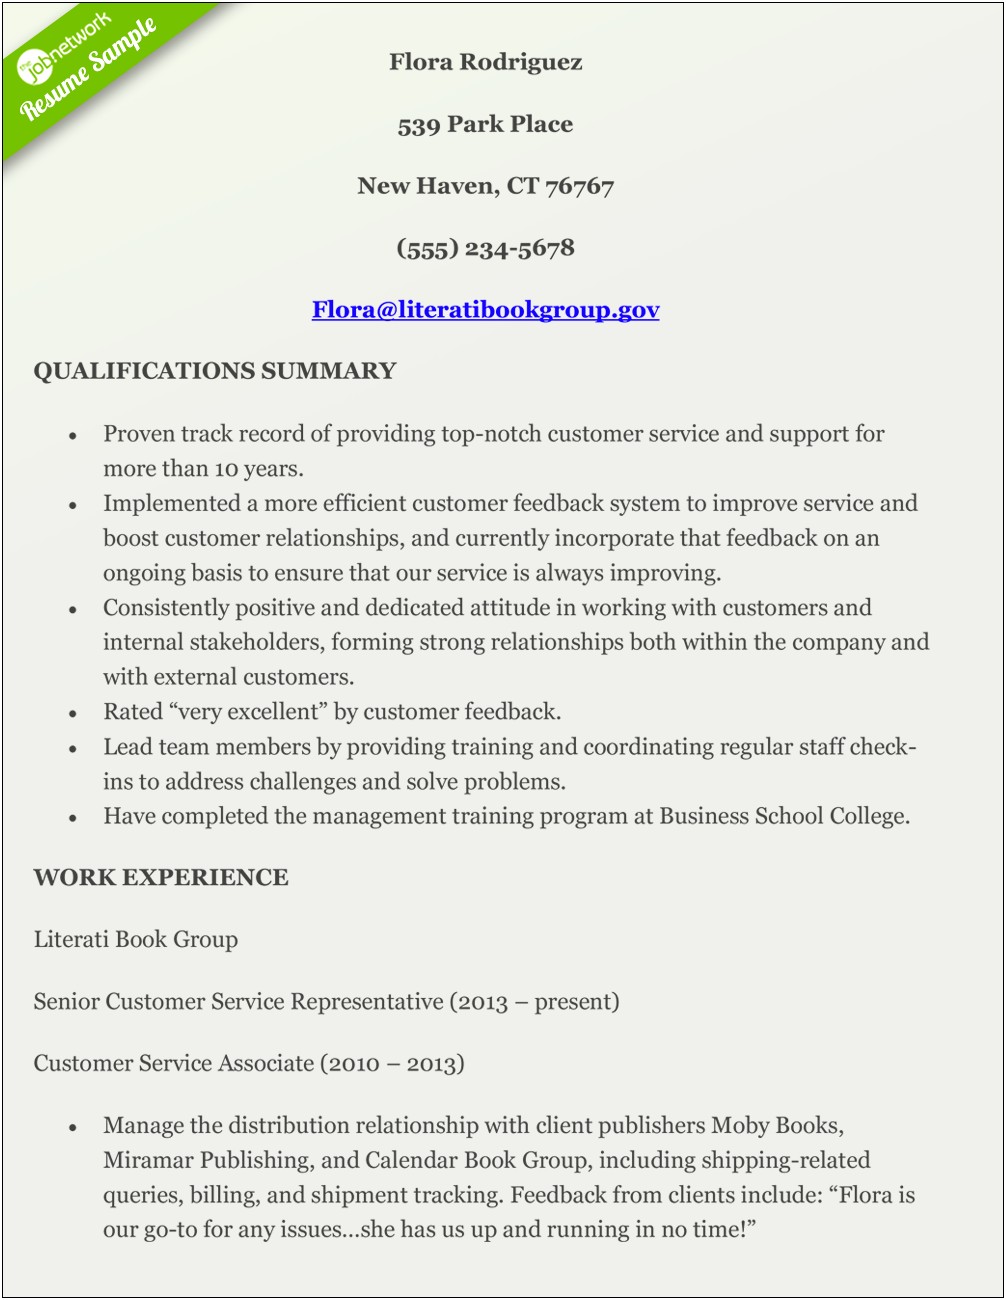 Resume Skills For Guest Services